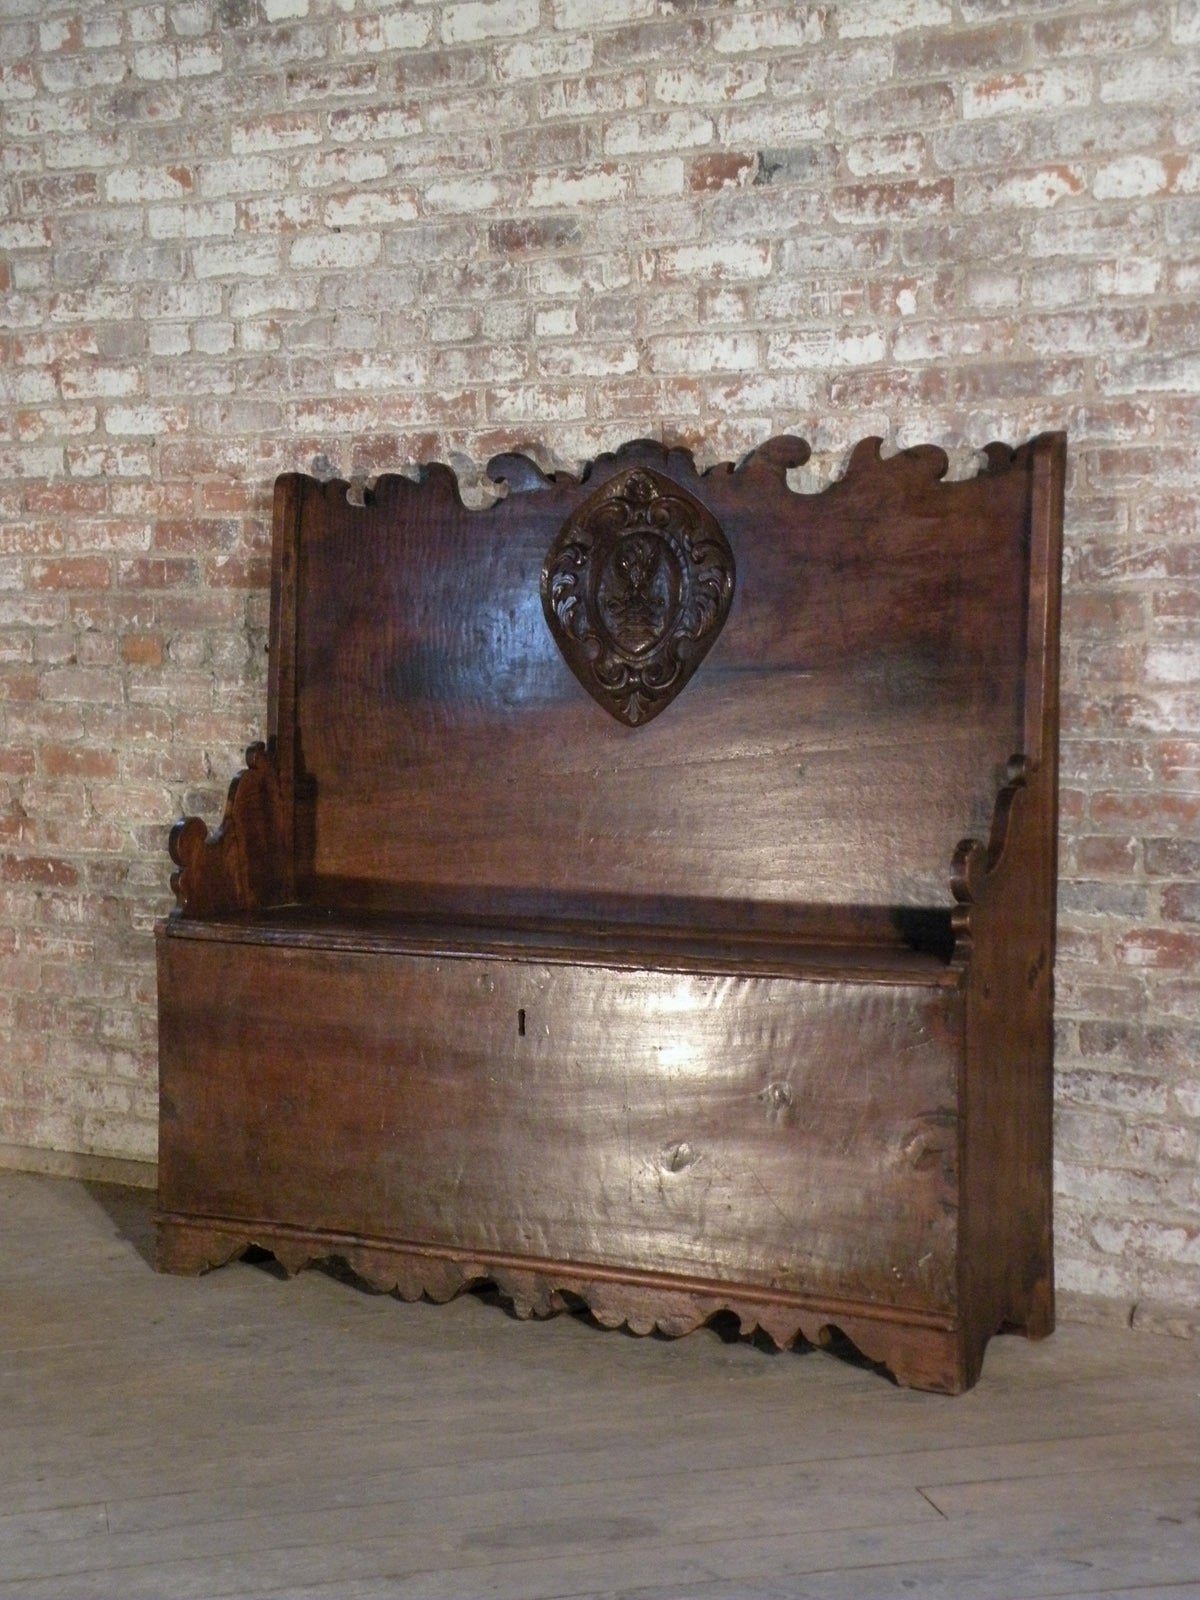 Attractive Italian cassapanca or hall bench, the unusually high back bearing a prominent carved crest in the center, the narrow seat having a lift top to reveal a storage compartment. Beautiful, rich patina.
Our pieces are left in lived-in